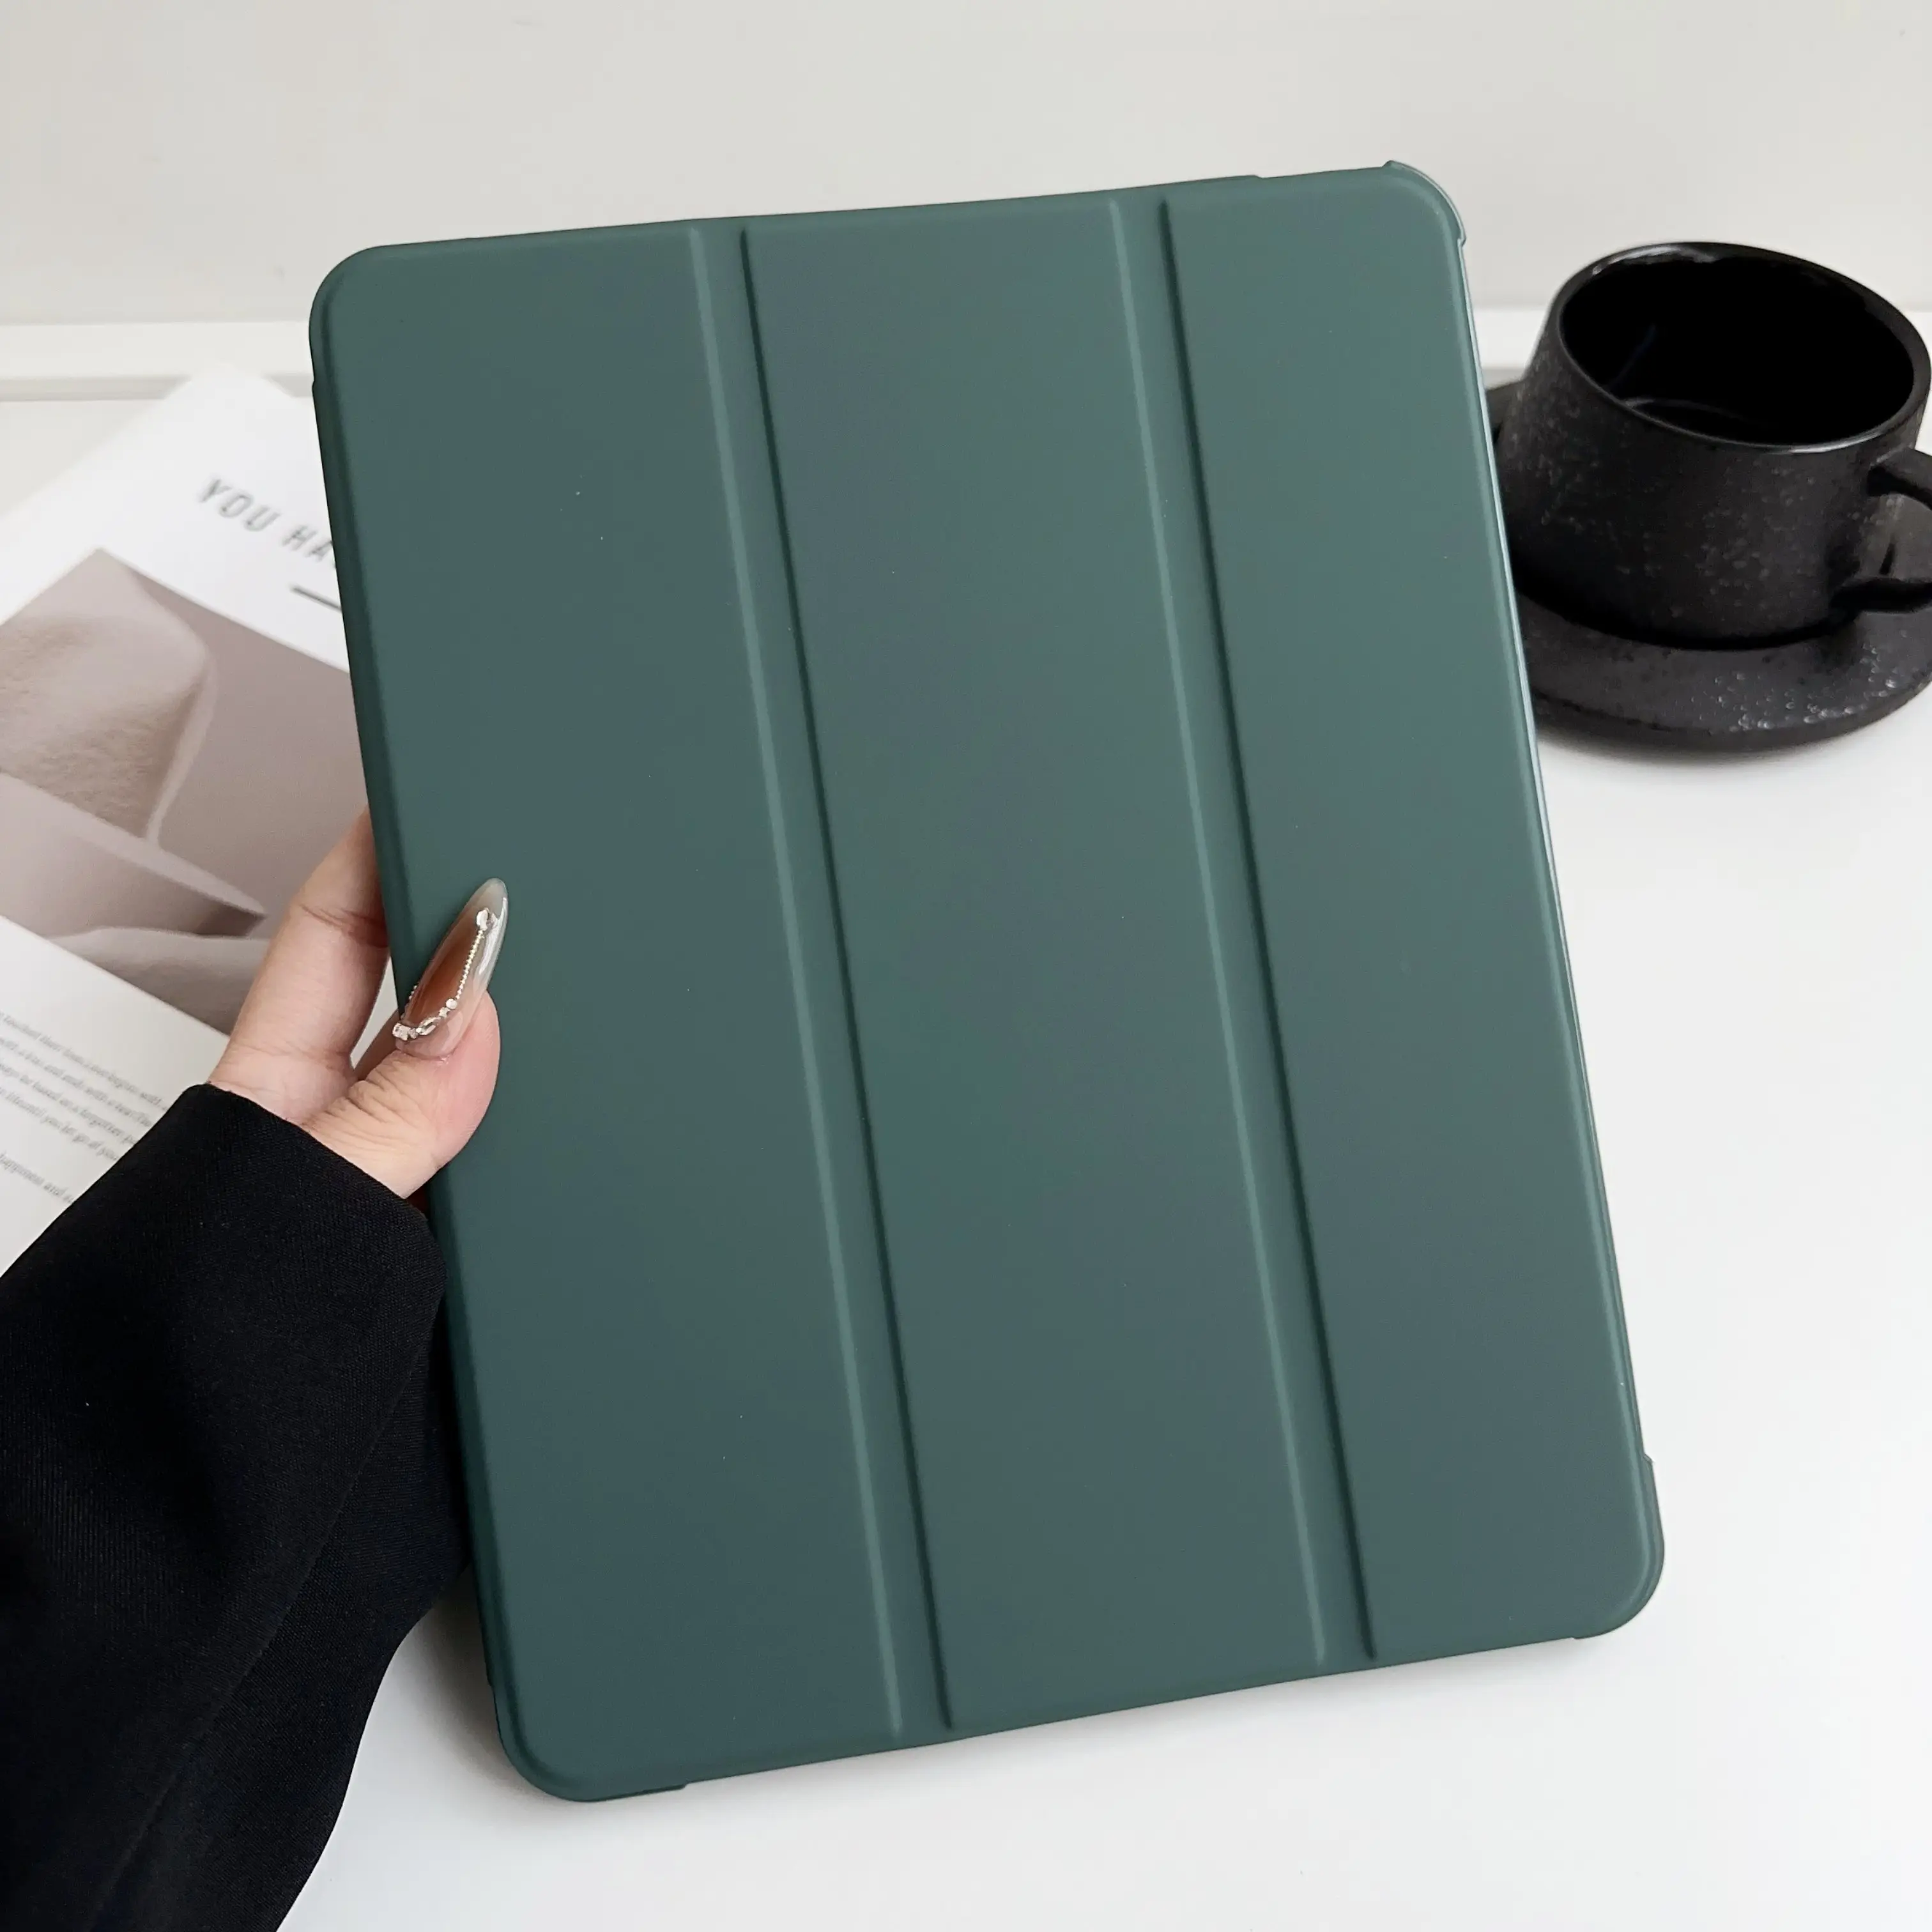 Shockproof Slim Tablet Case With Soft TPU Cover For iPad Pro 11 Inch Case PU Leather Tablet Sleeve Case Manufacture Luxury